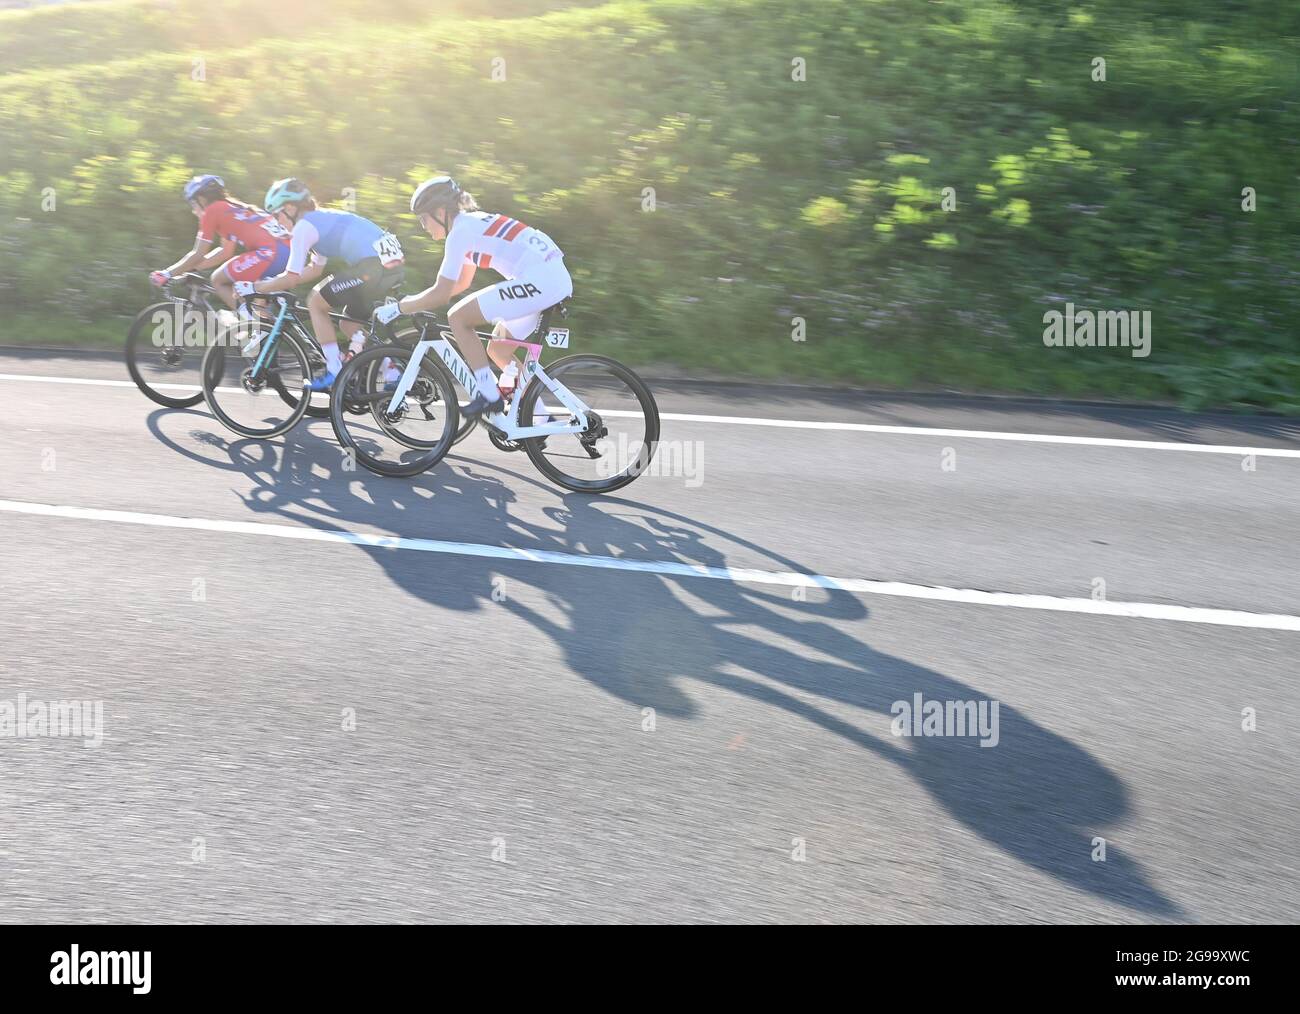 Shizuoka, Japan. 25th July, 2021. Riders compete during the women's cycling road race at the Tokyo 2020 Olympic Games in Shizuoka, Japan, July 25, 2021. Credit: He Changshan/Xinhua/Alamy Live News Stock Photo